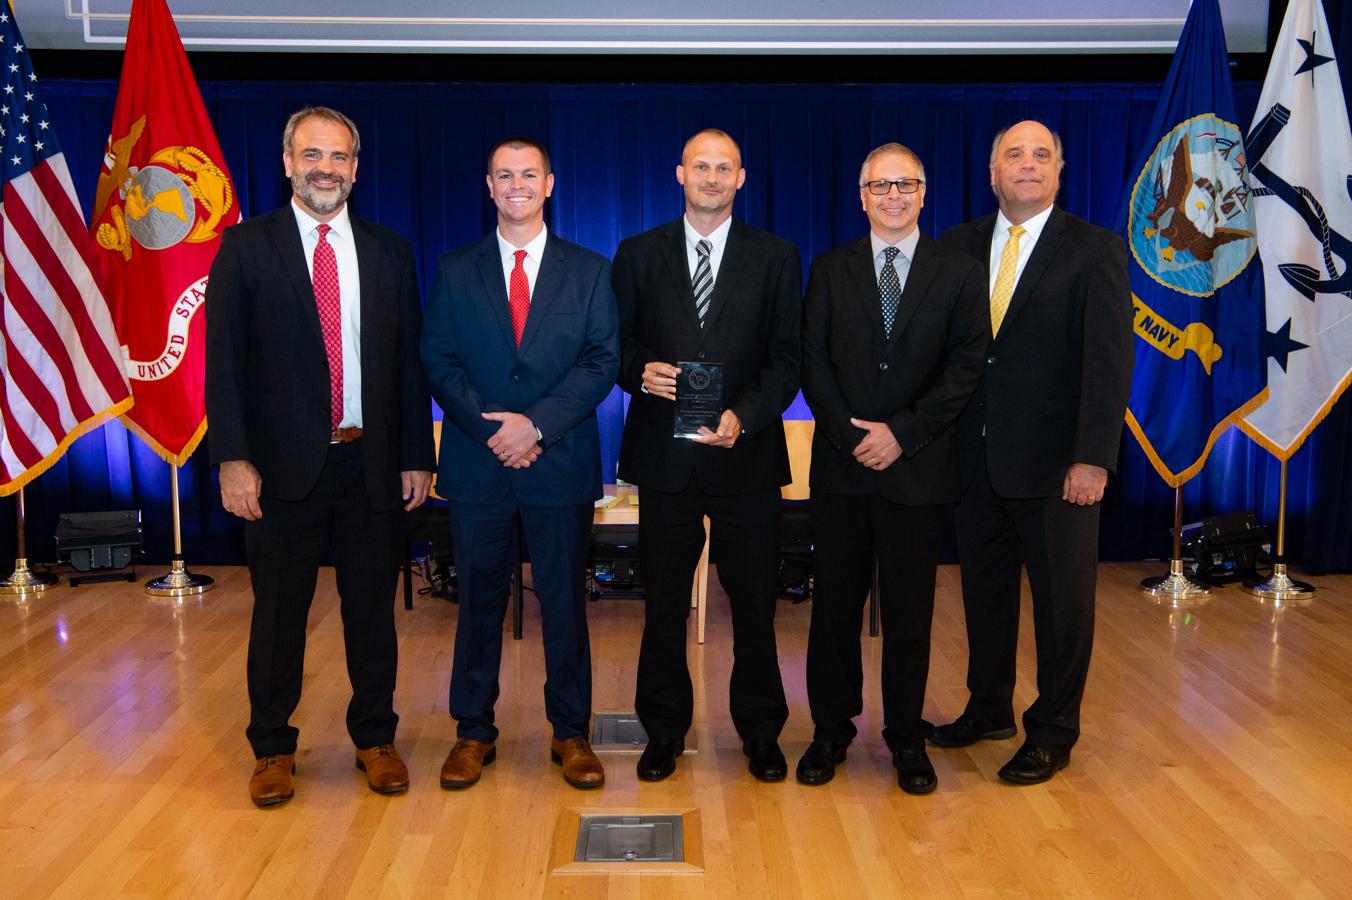 Three FRCE test equipment engineers accept a  2022 Dr. Delores M. Etter Top Scientists and Engineers of the Year award from Assistant Secretary of the Navy for Research, Development and Acquisition leadership.